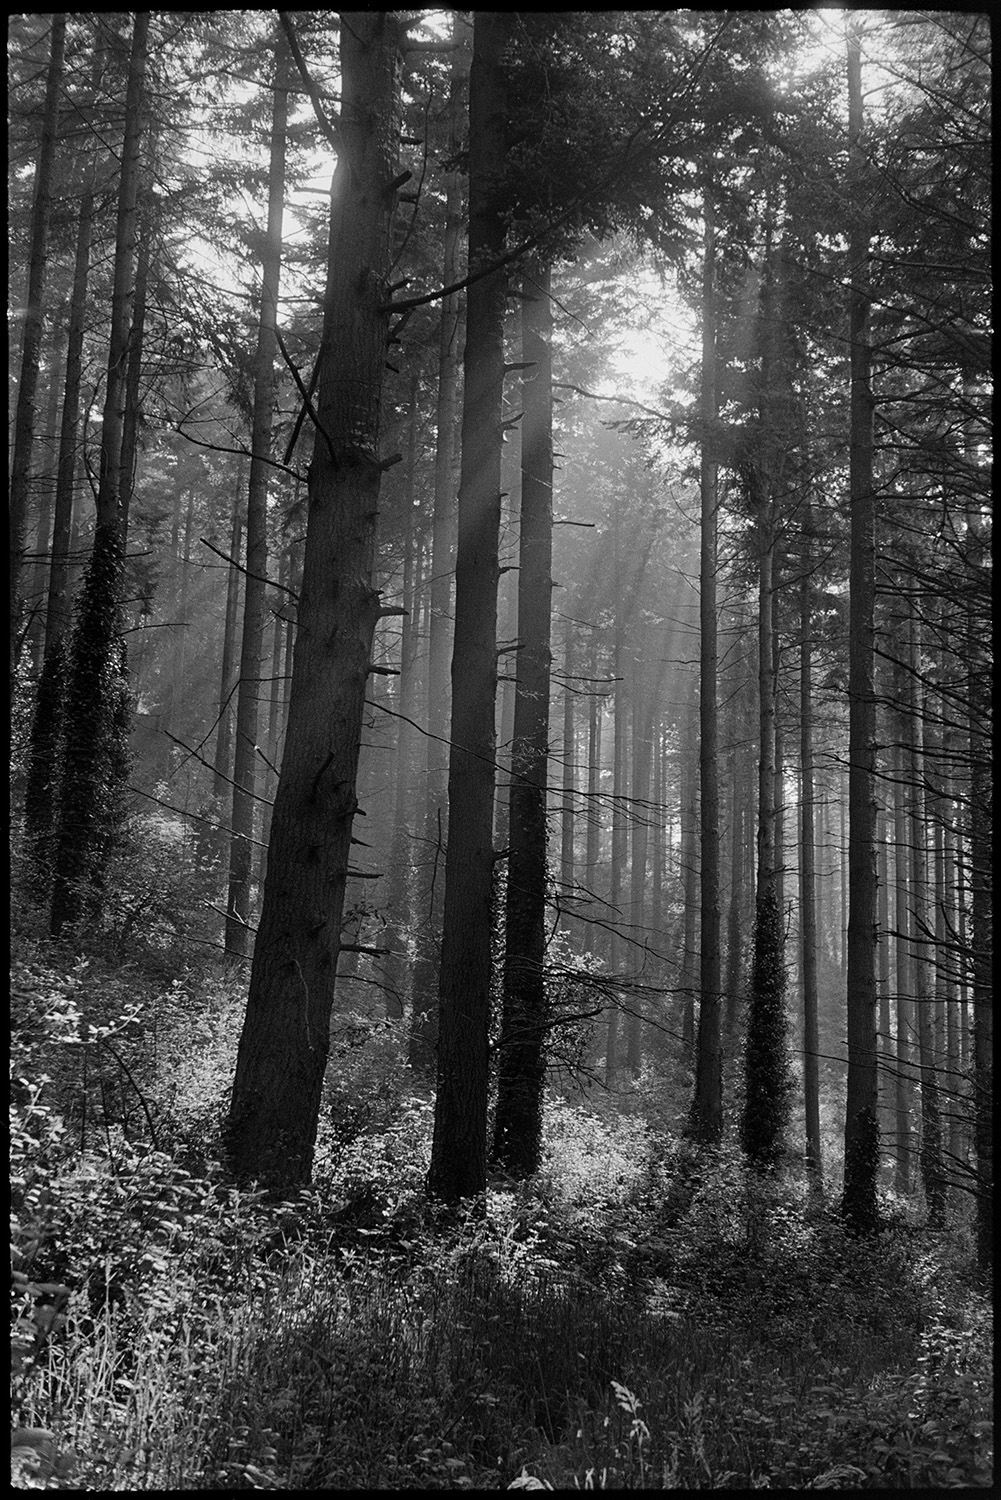 Fir forest with shafts of sunlight.
[Shafts of light shining through fir trees in Eggesford Forest.]